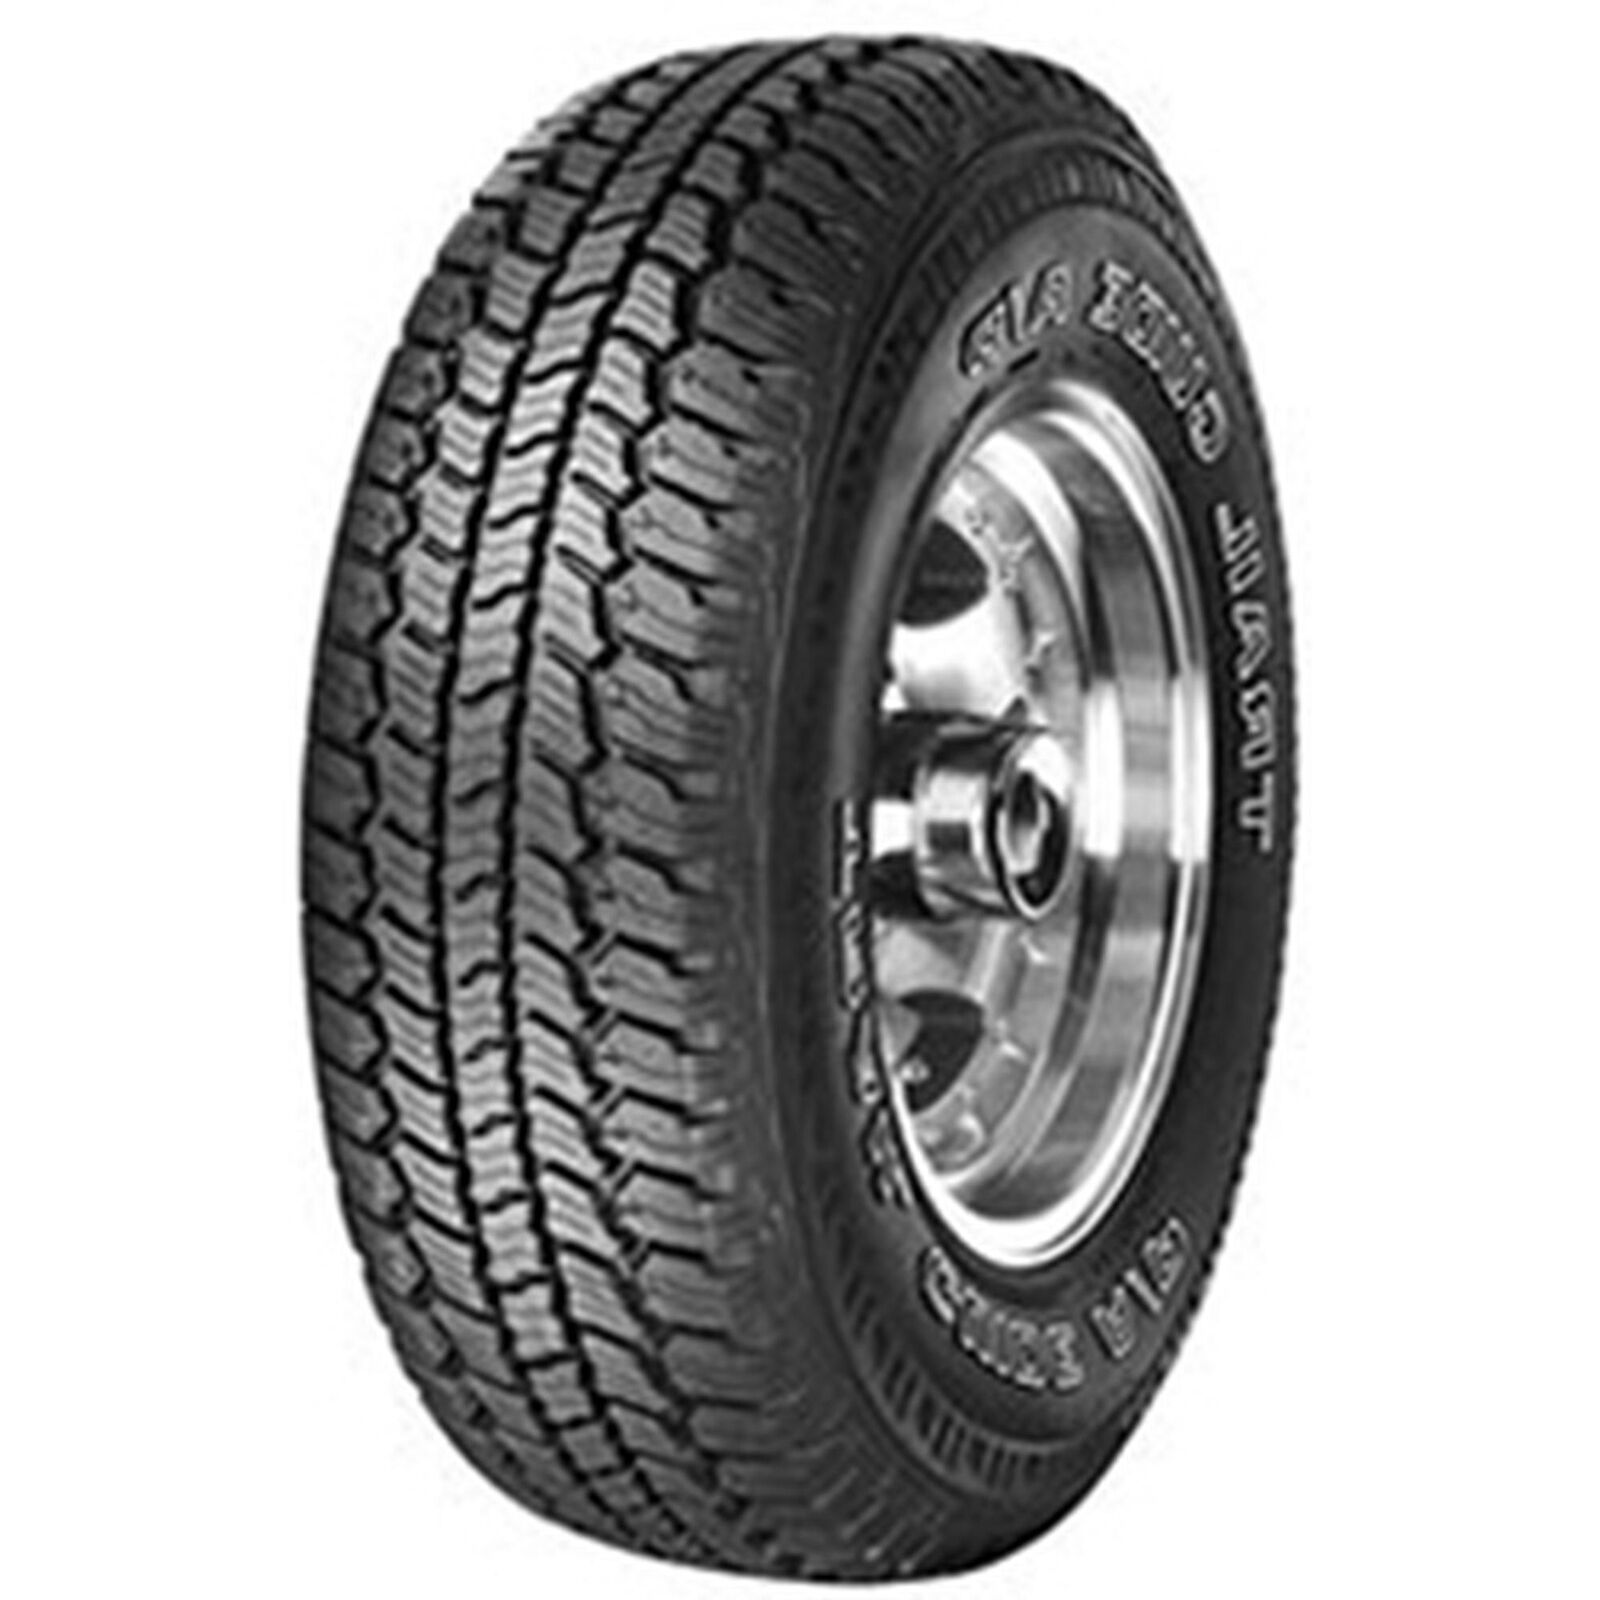 1 New Sigma Trail Guide A/t  - Lt265x70r18 Tires 2657018 265 70 18